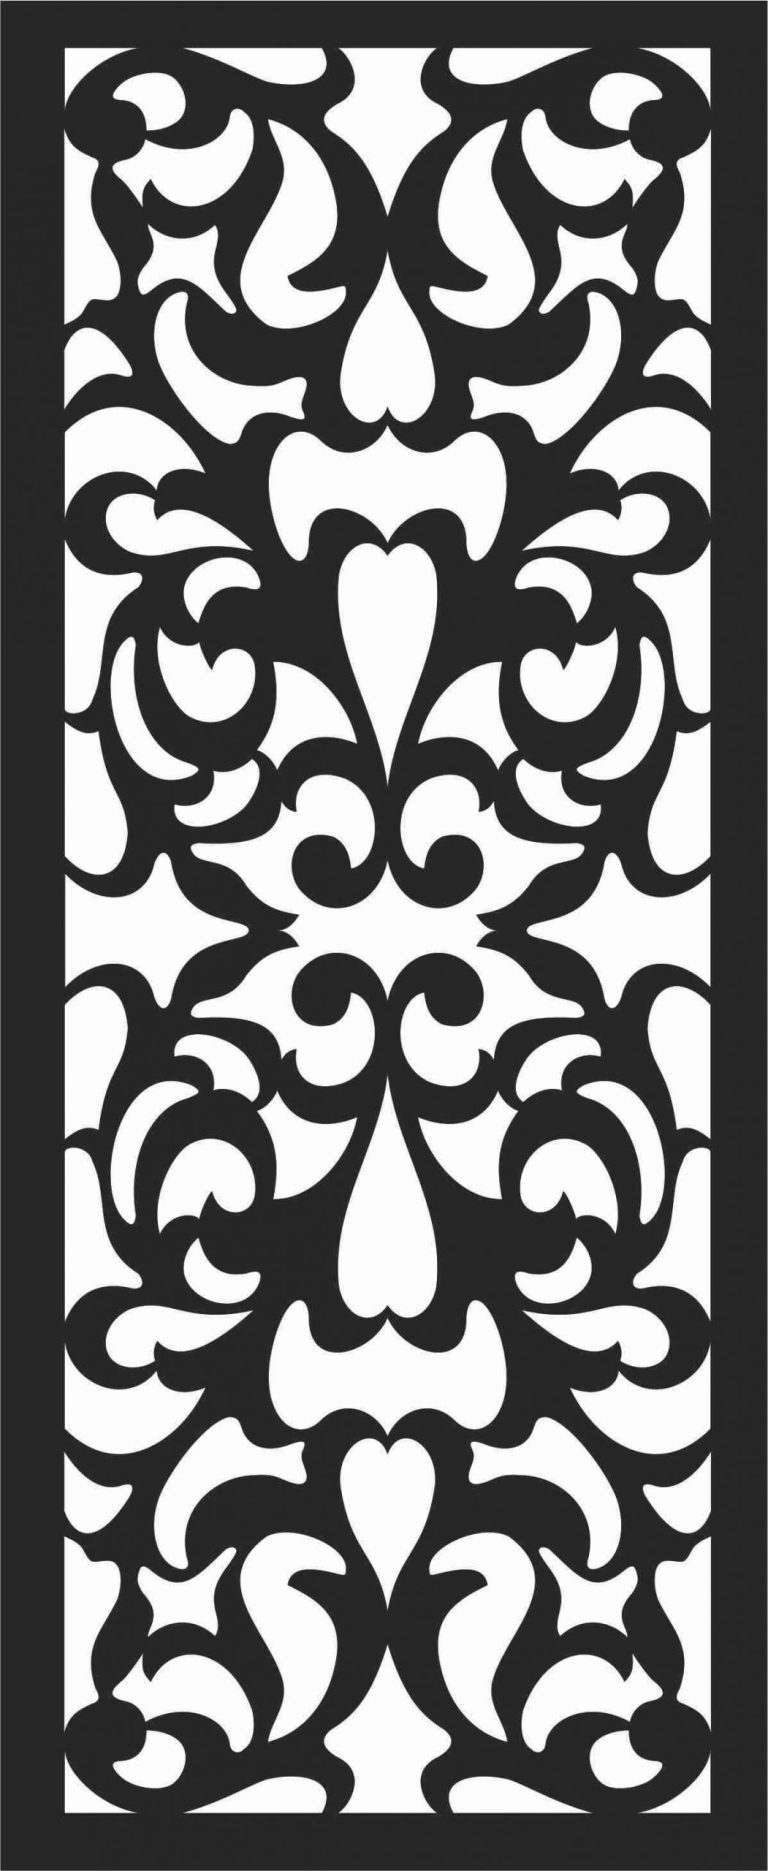 Floral Laser Cut Metal Privacy Screen Panel DXF File